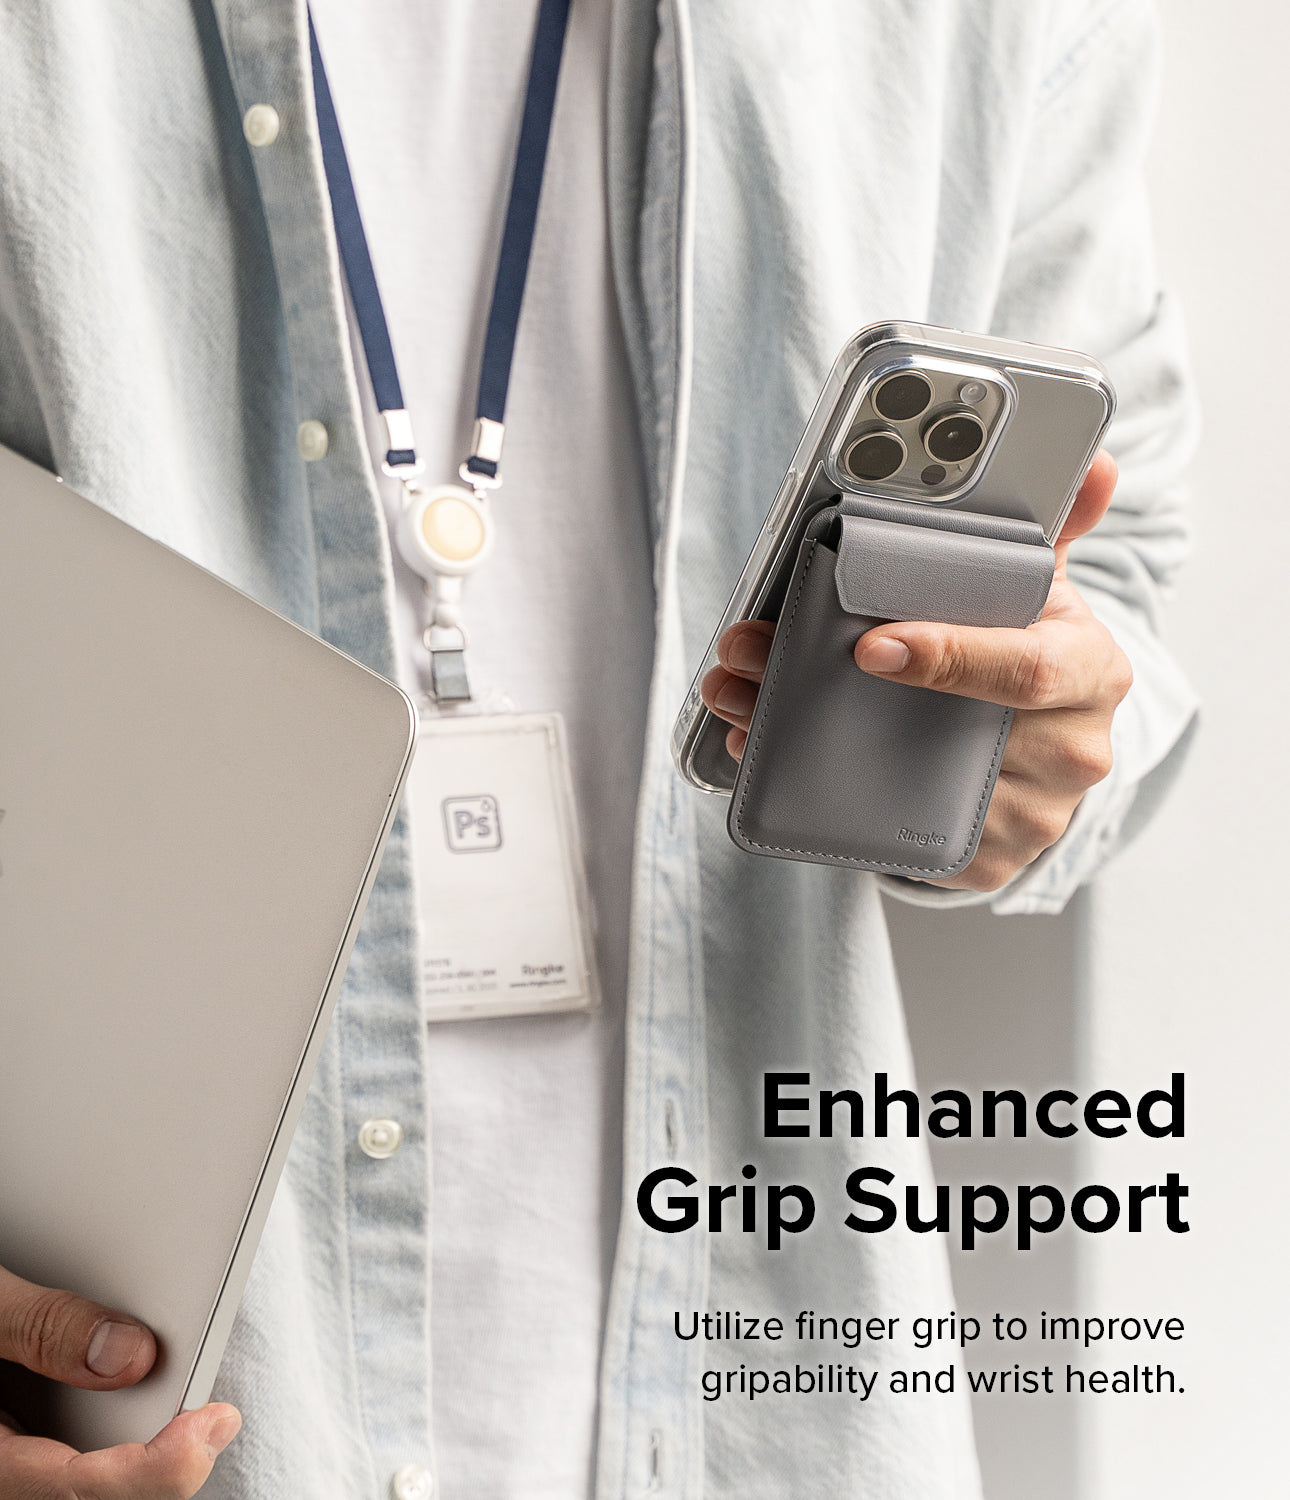 Ringke Stand Wallet Magnetic - Enhanced Grip Support. Utilize finger grip to improve gripability and wrist health.